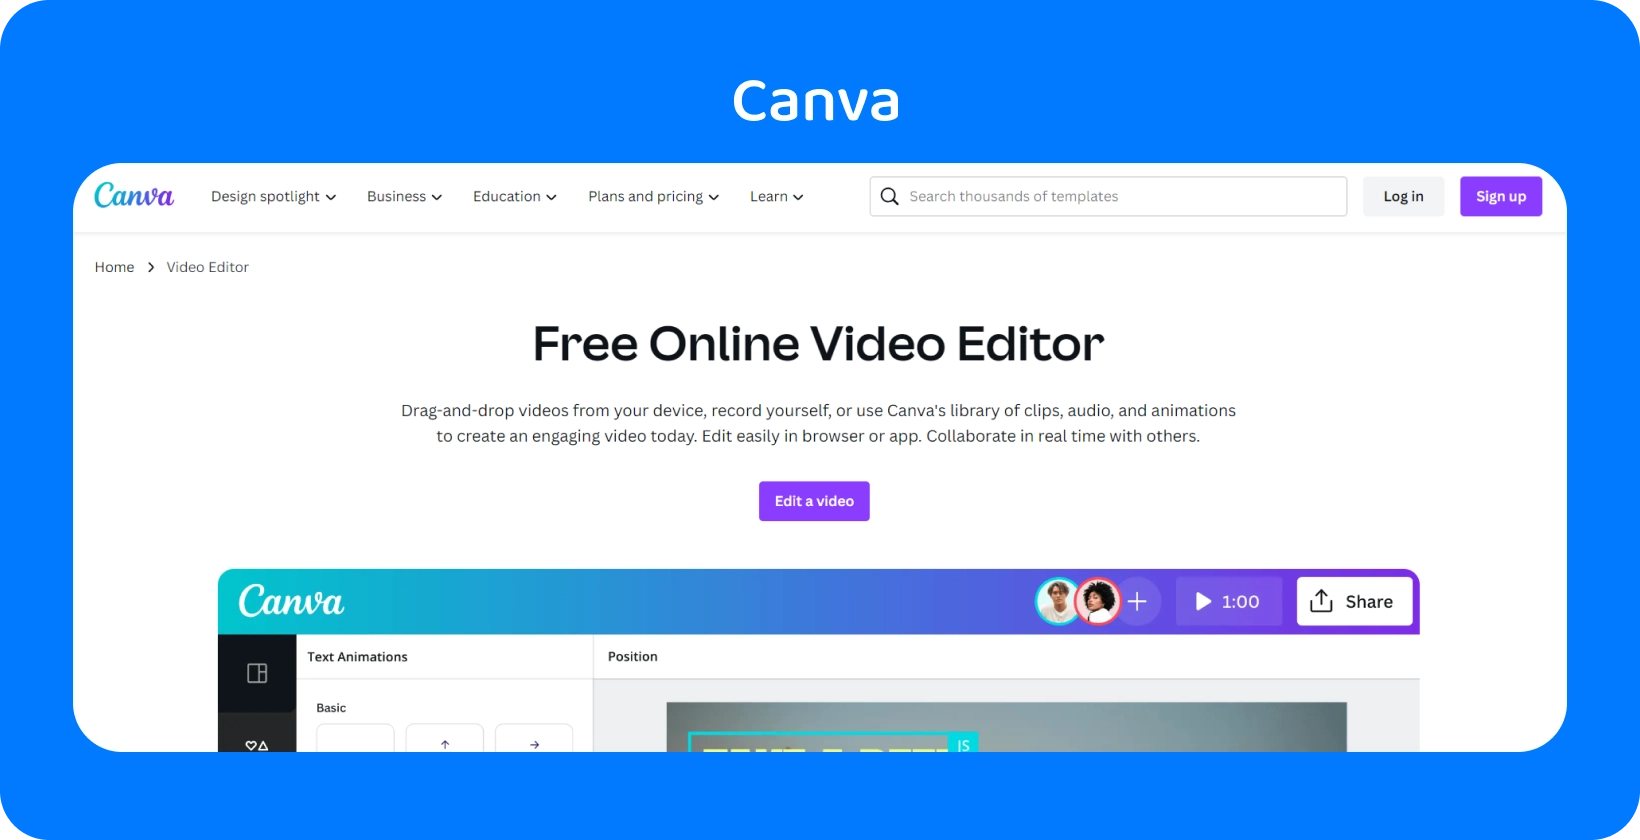 Canva's user-friendly interface displayed with various design options for social media, presentations, videos, and more.